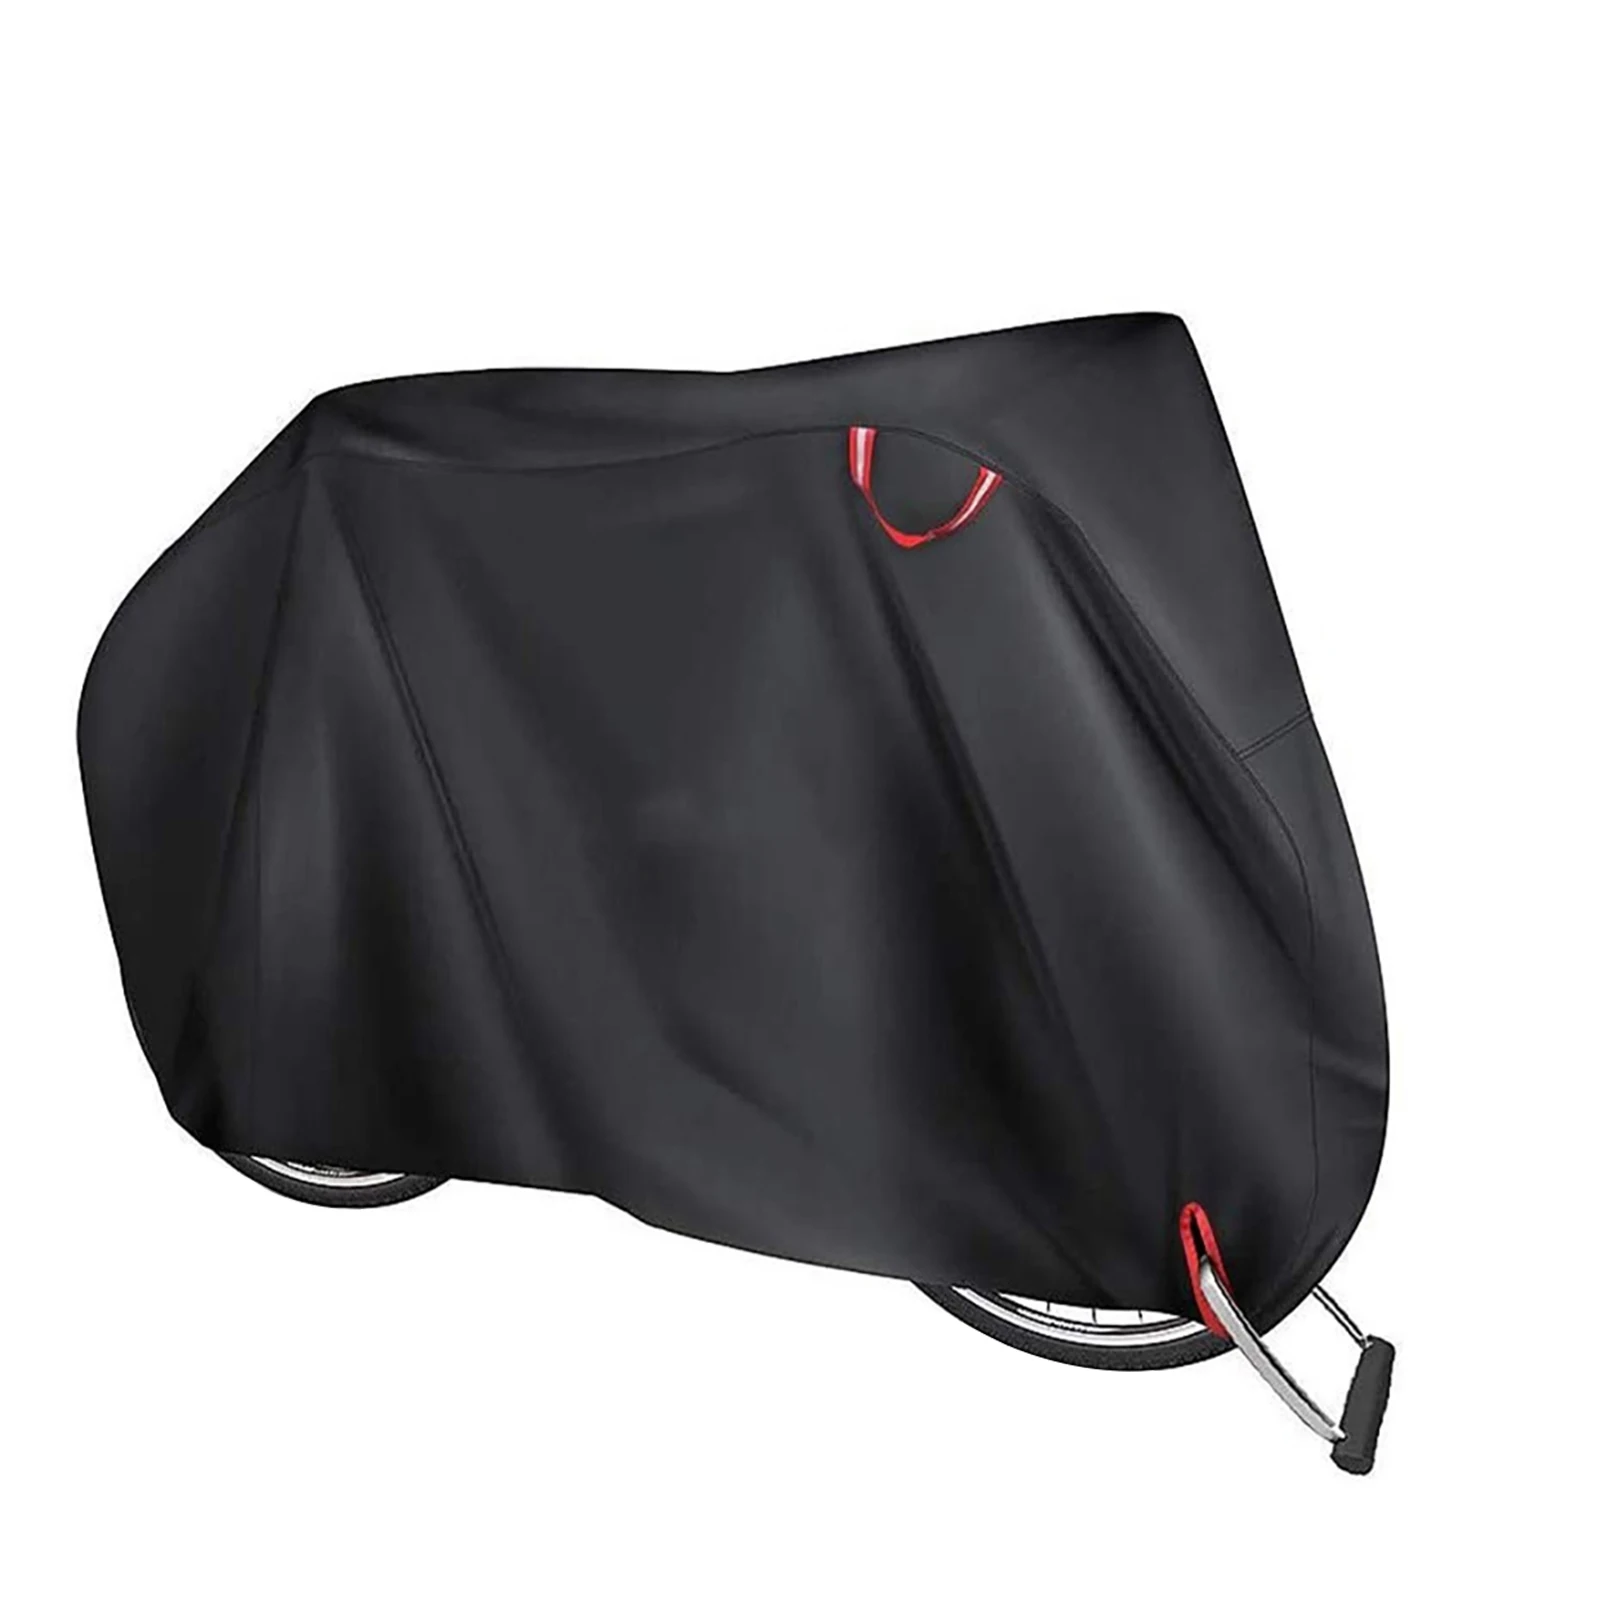 

Bike Cover For 1 Or 2 Bikes Heavy Duty 210D Oxford Ripstop Material Bike Seat Rain Cover UV Dust Wind Proof With Lock Hole For